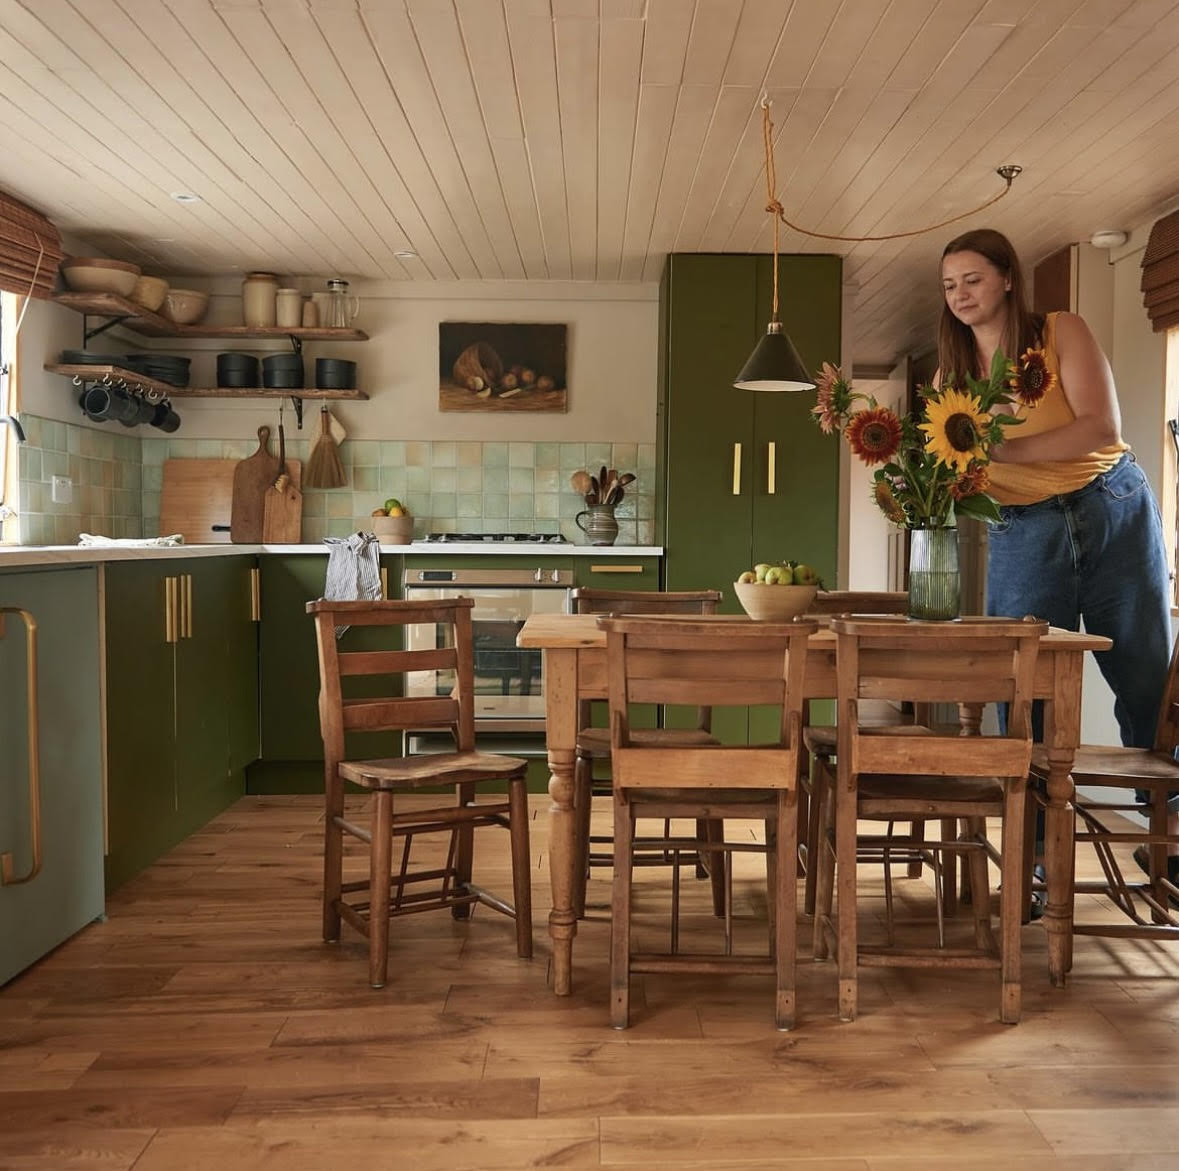 Smoky green cabinets with open shelving, green tiling and wood floor. In front of the cupboards sit an old wooden table with vintage church chairs. To the side is a white woman arranging some sun flowers in a vase.